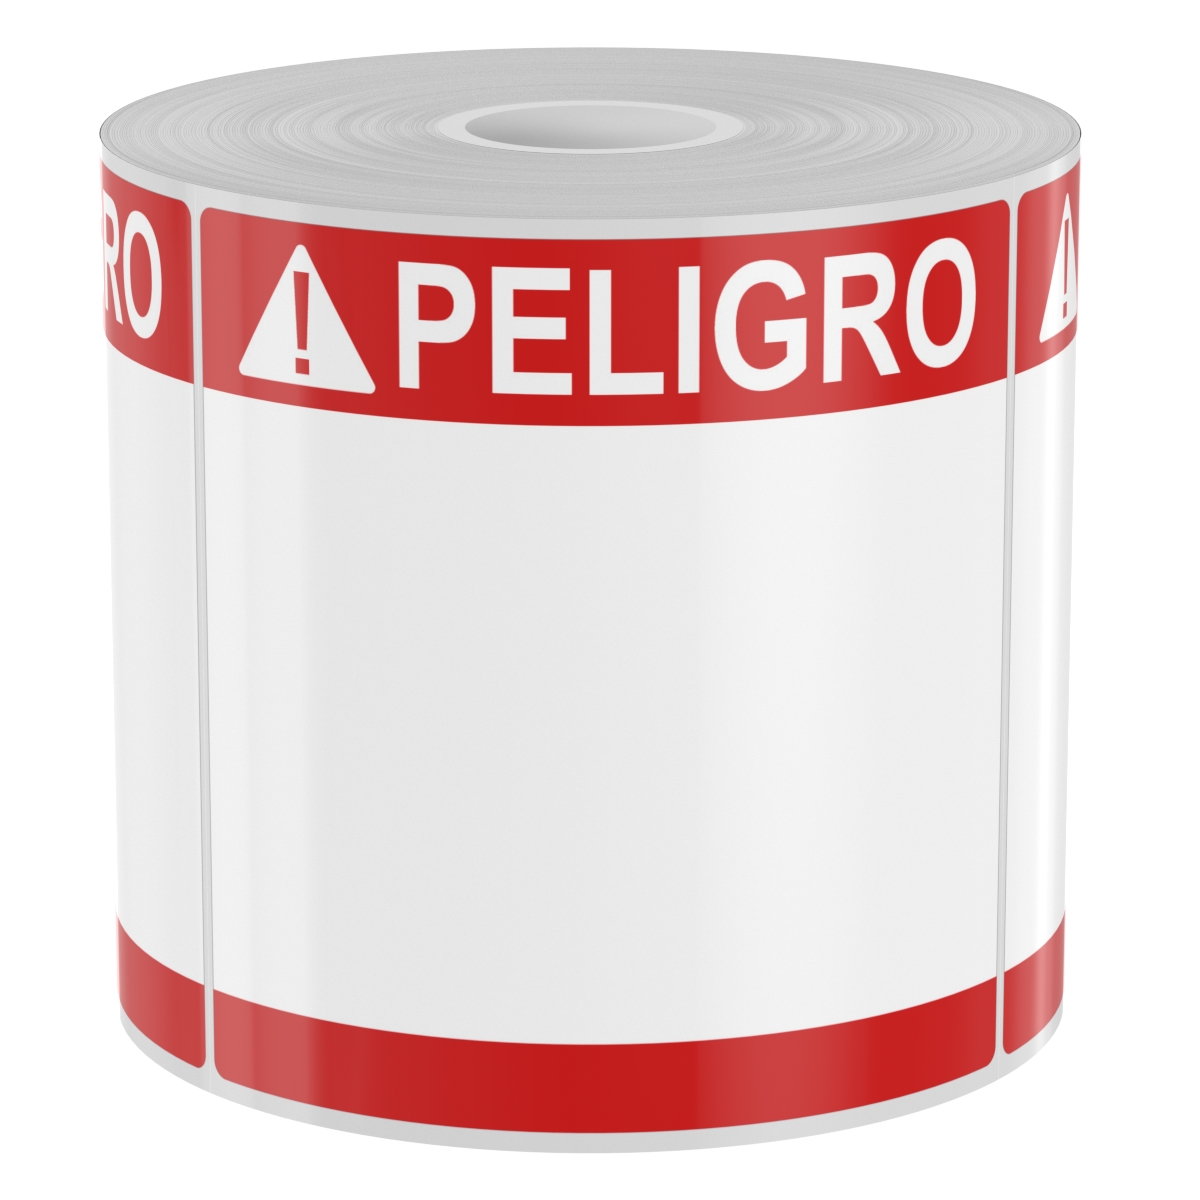 Ask a question about 250 4" x 4" High-Performance Die-Cut Red with White Peligro Double Band